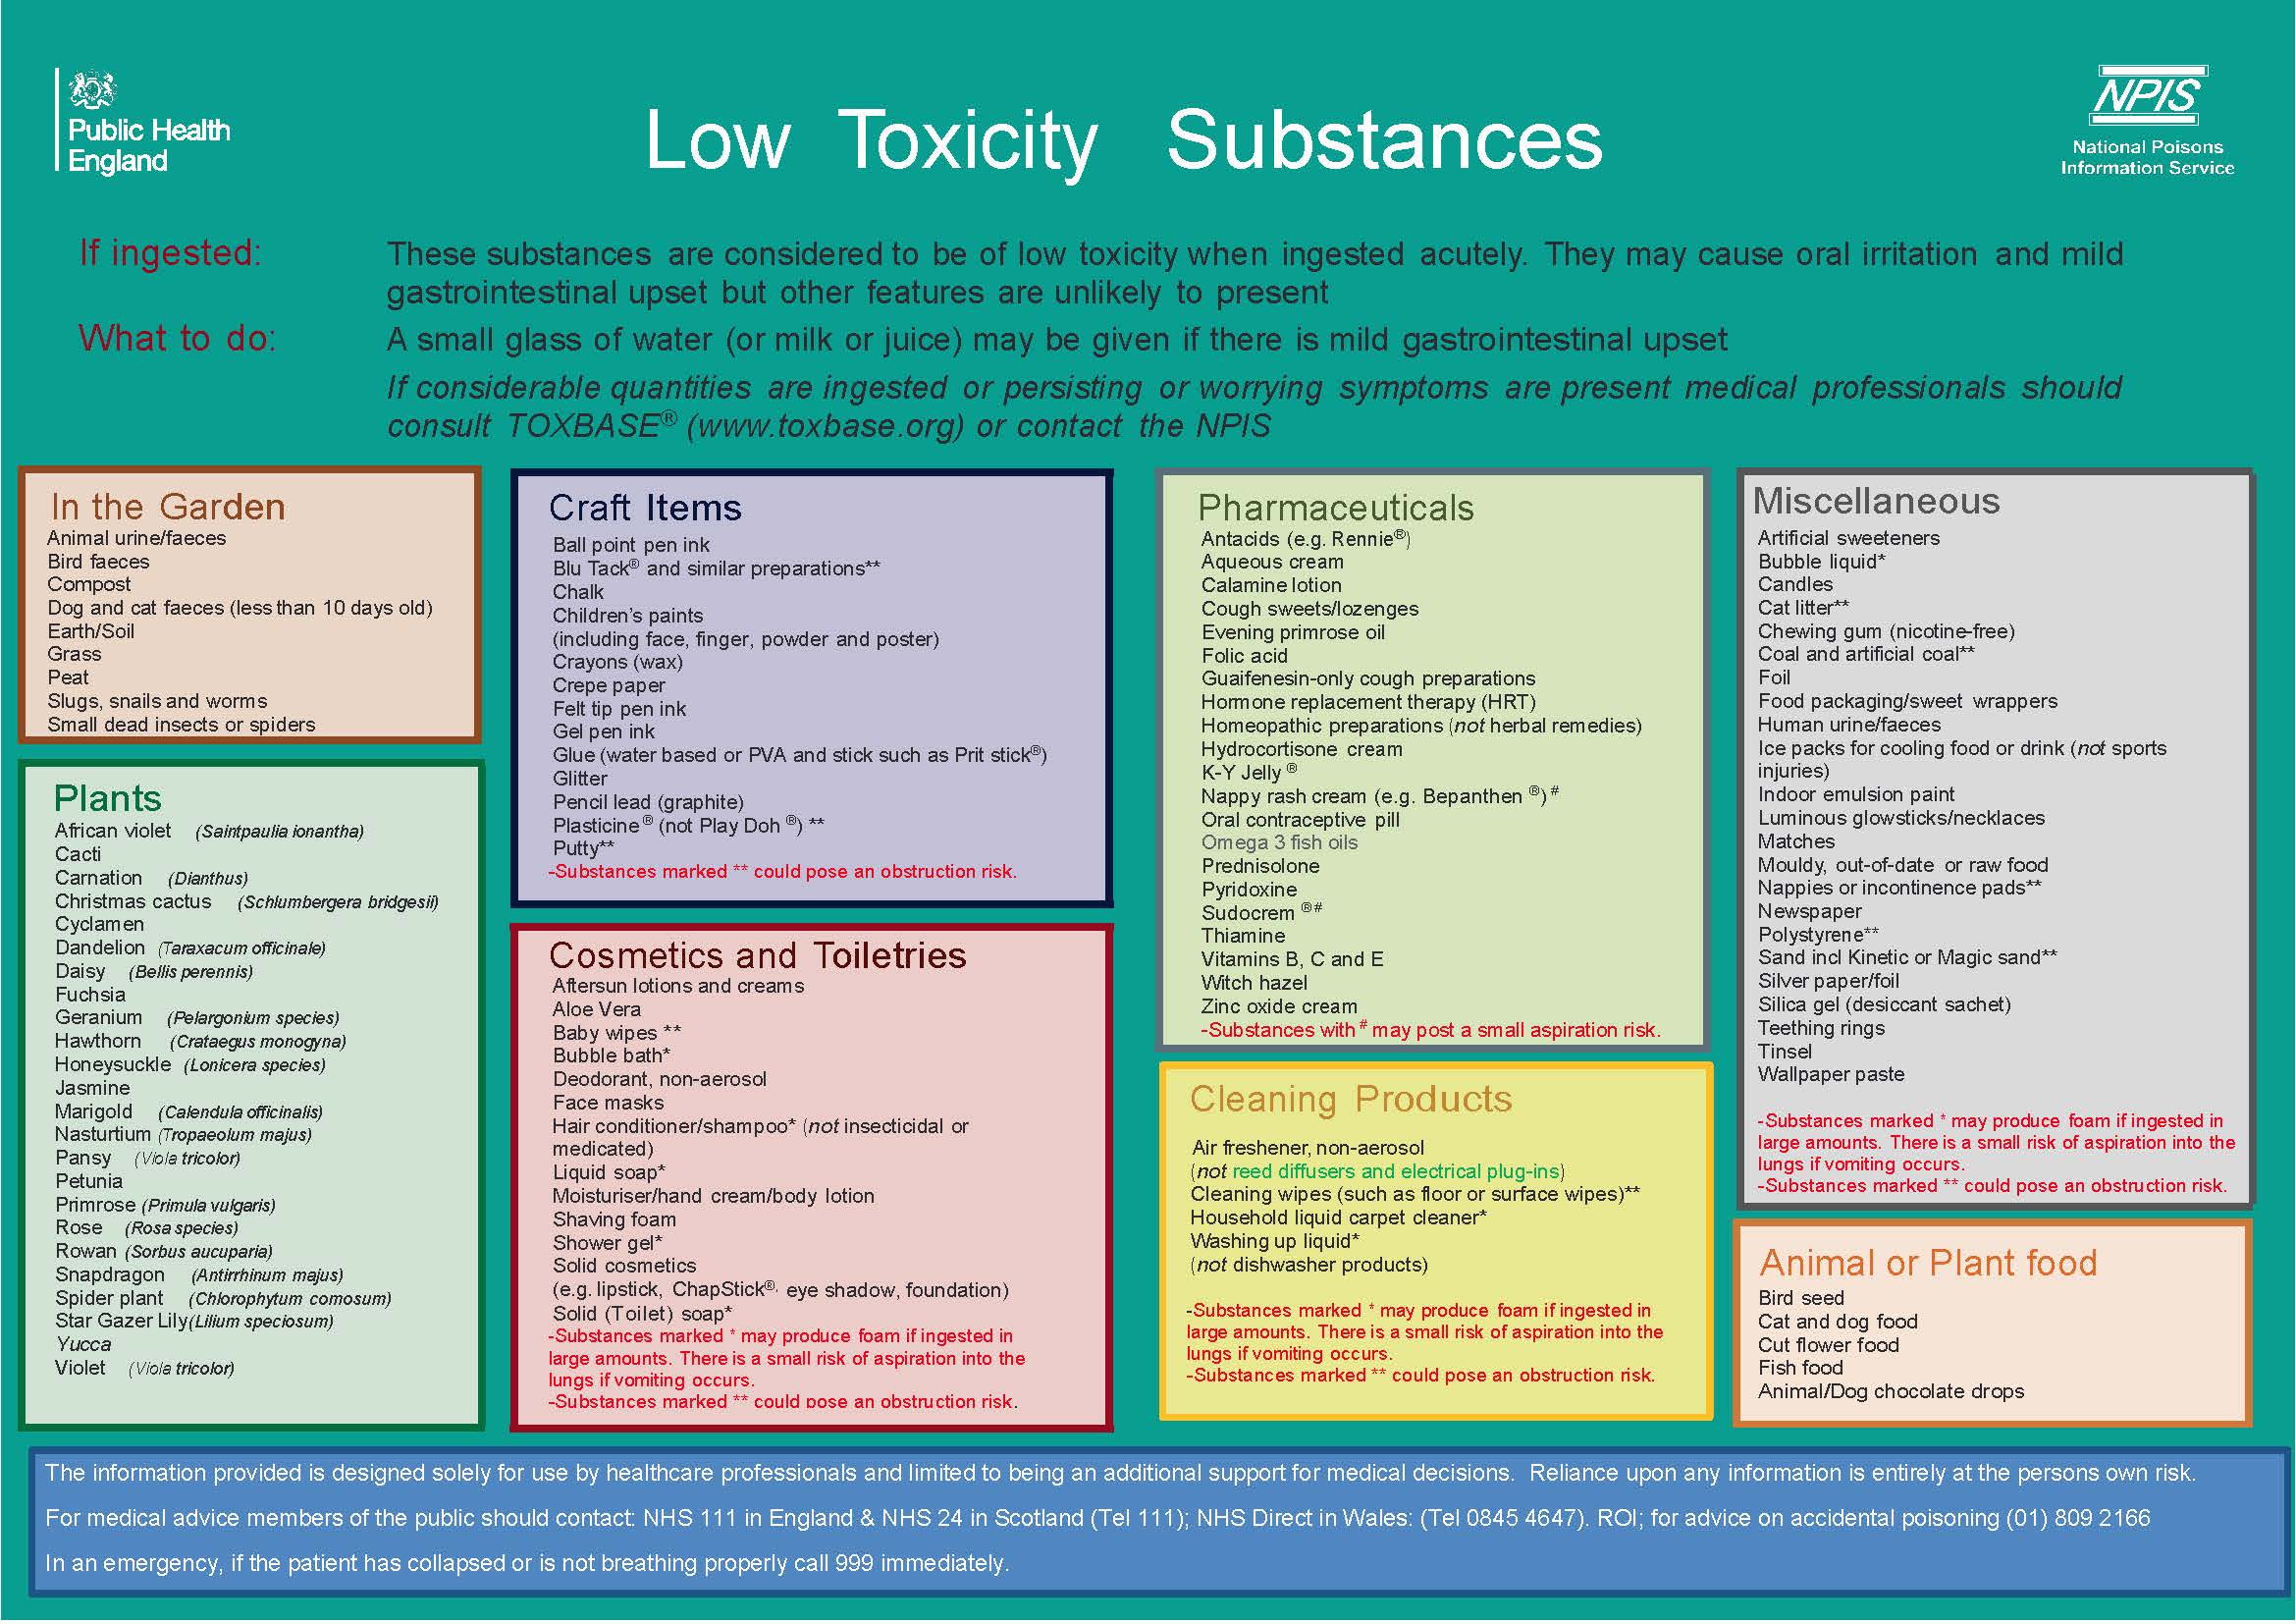 Low Toxicity leaflet